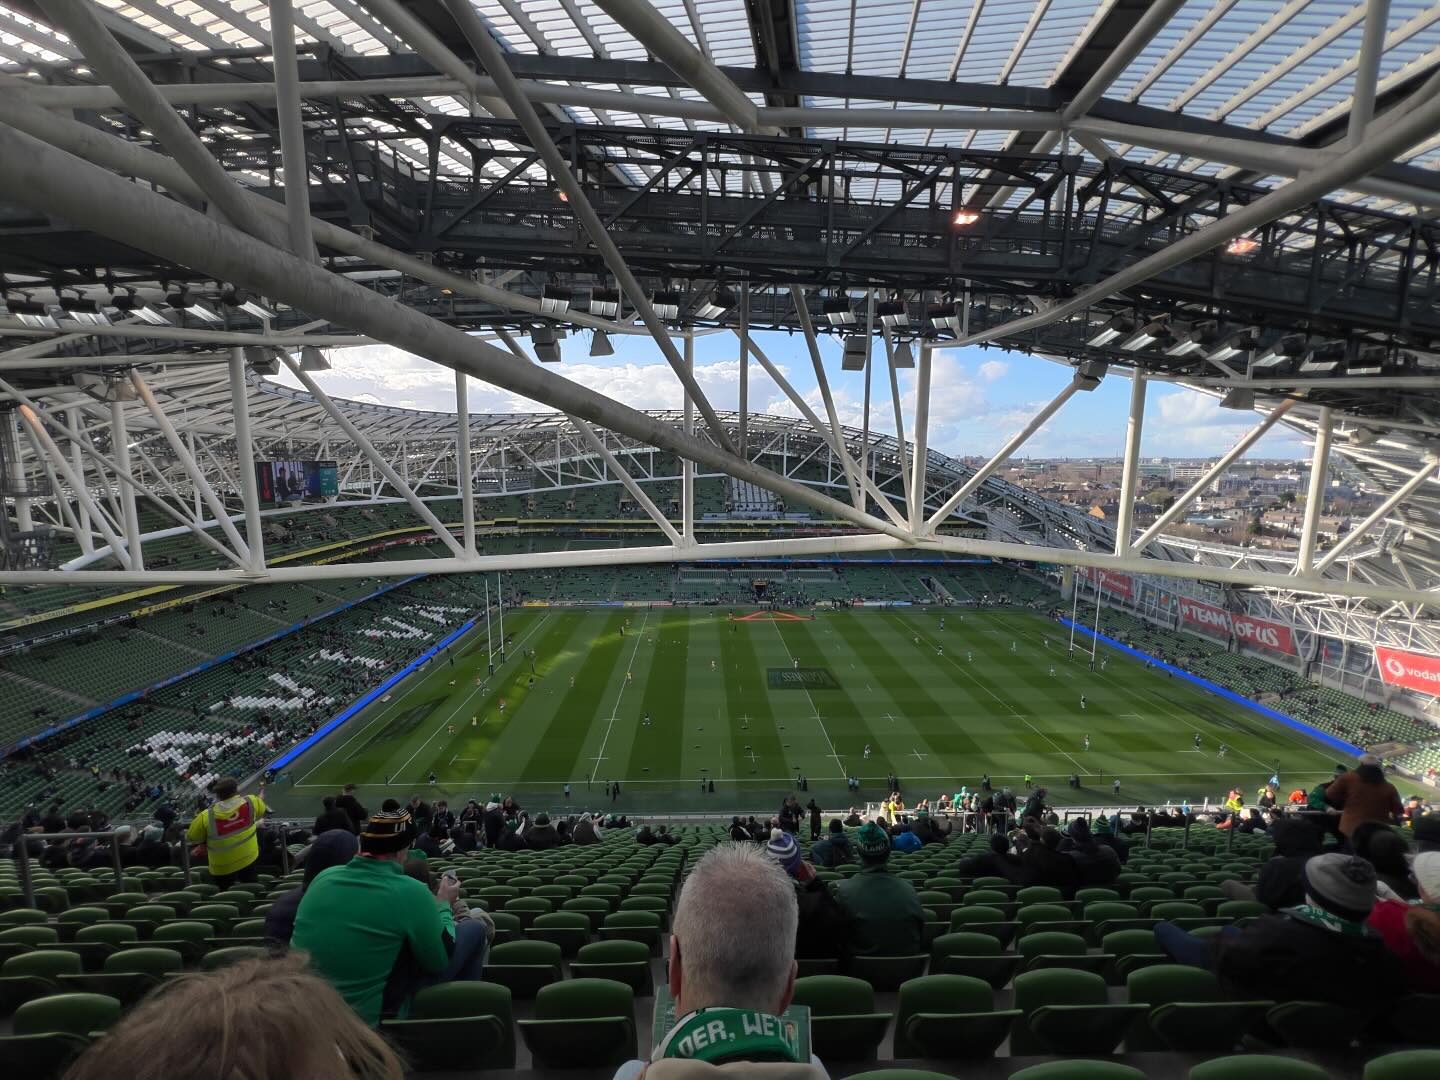 Todays view! Not sure the gods are looking down on Ireland today… but we are!